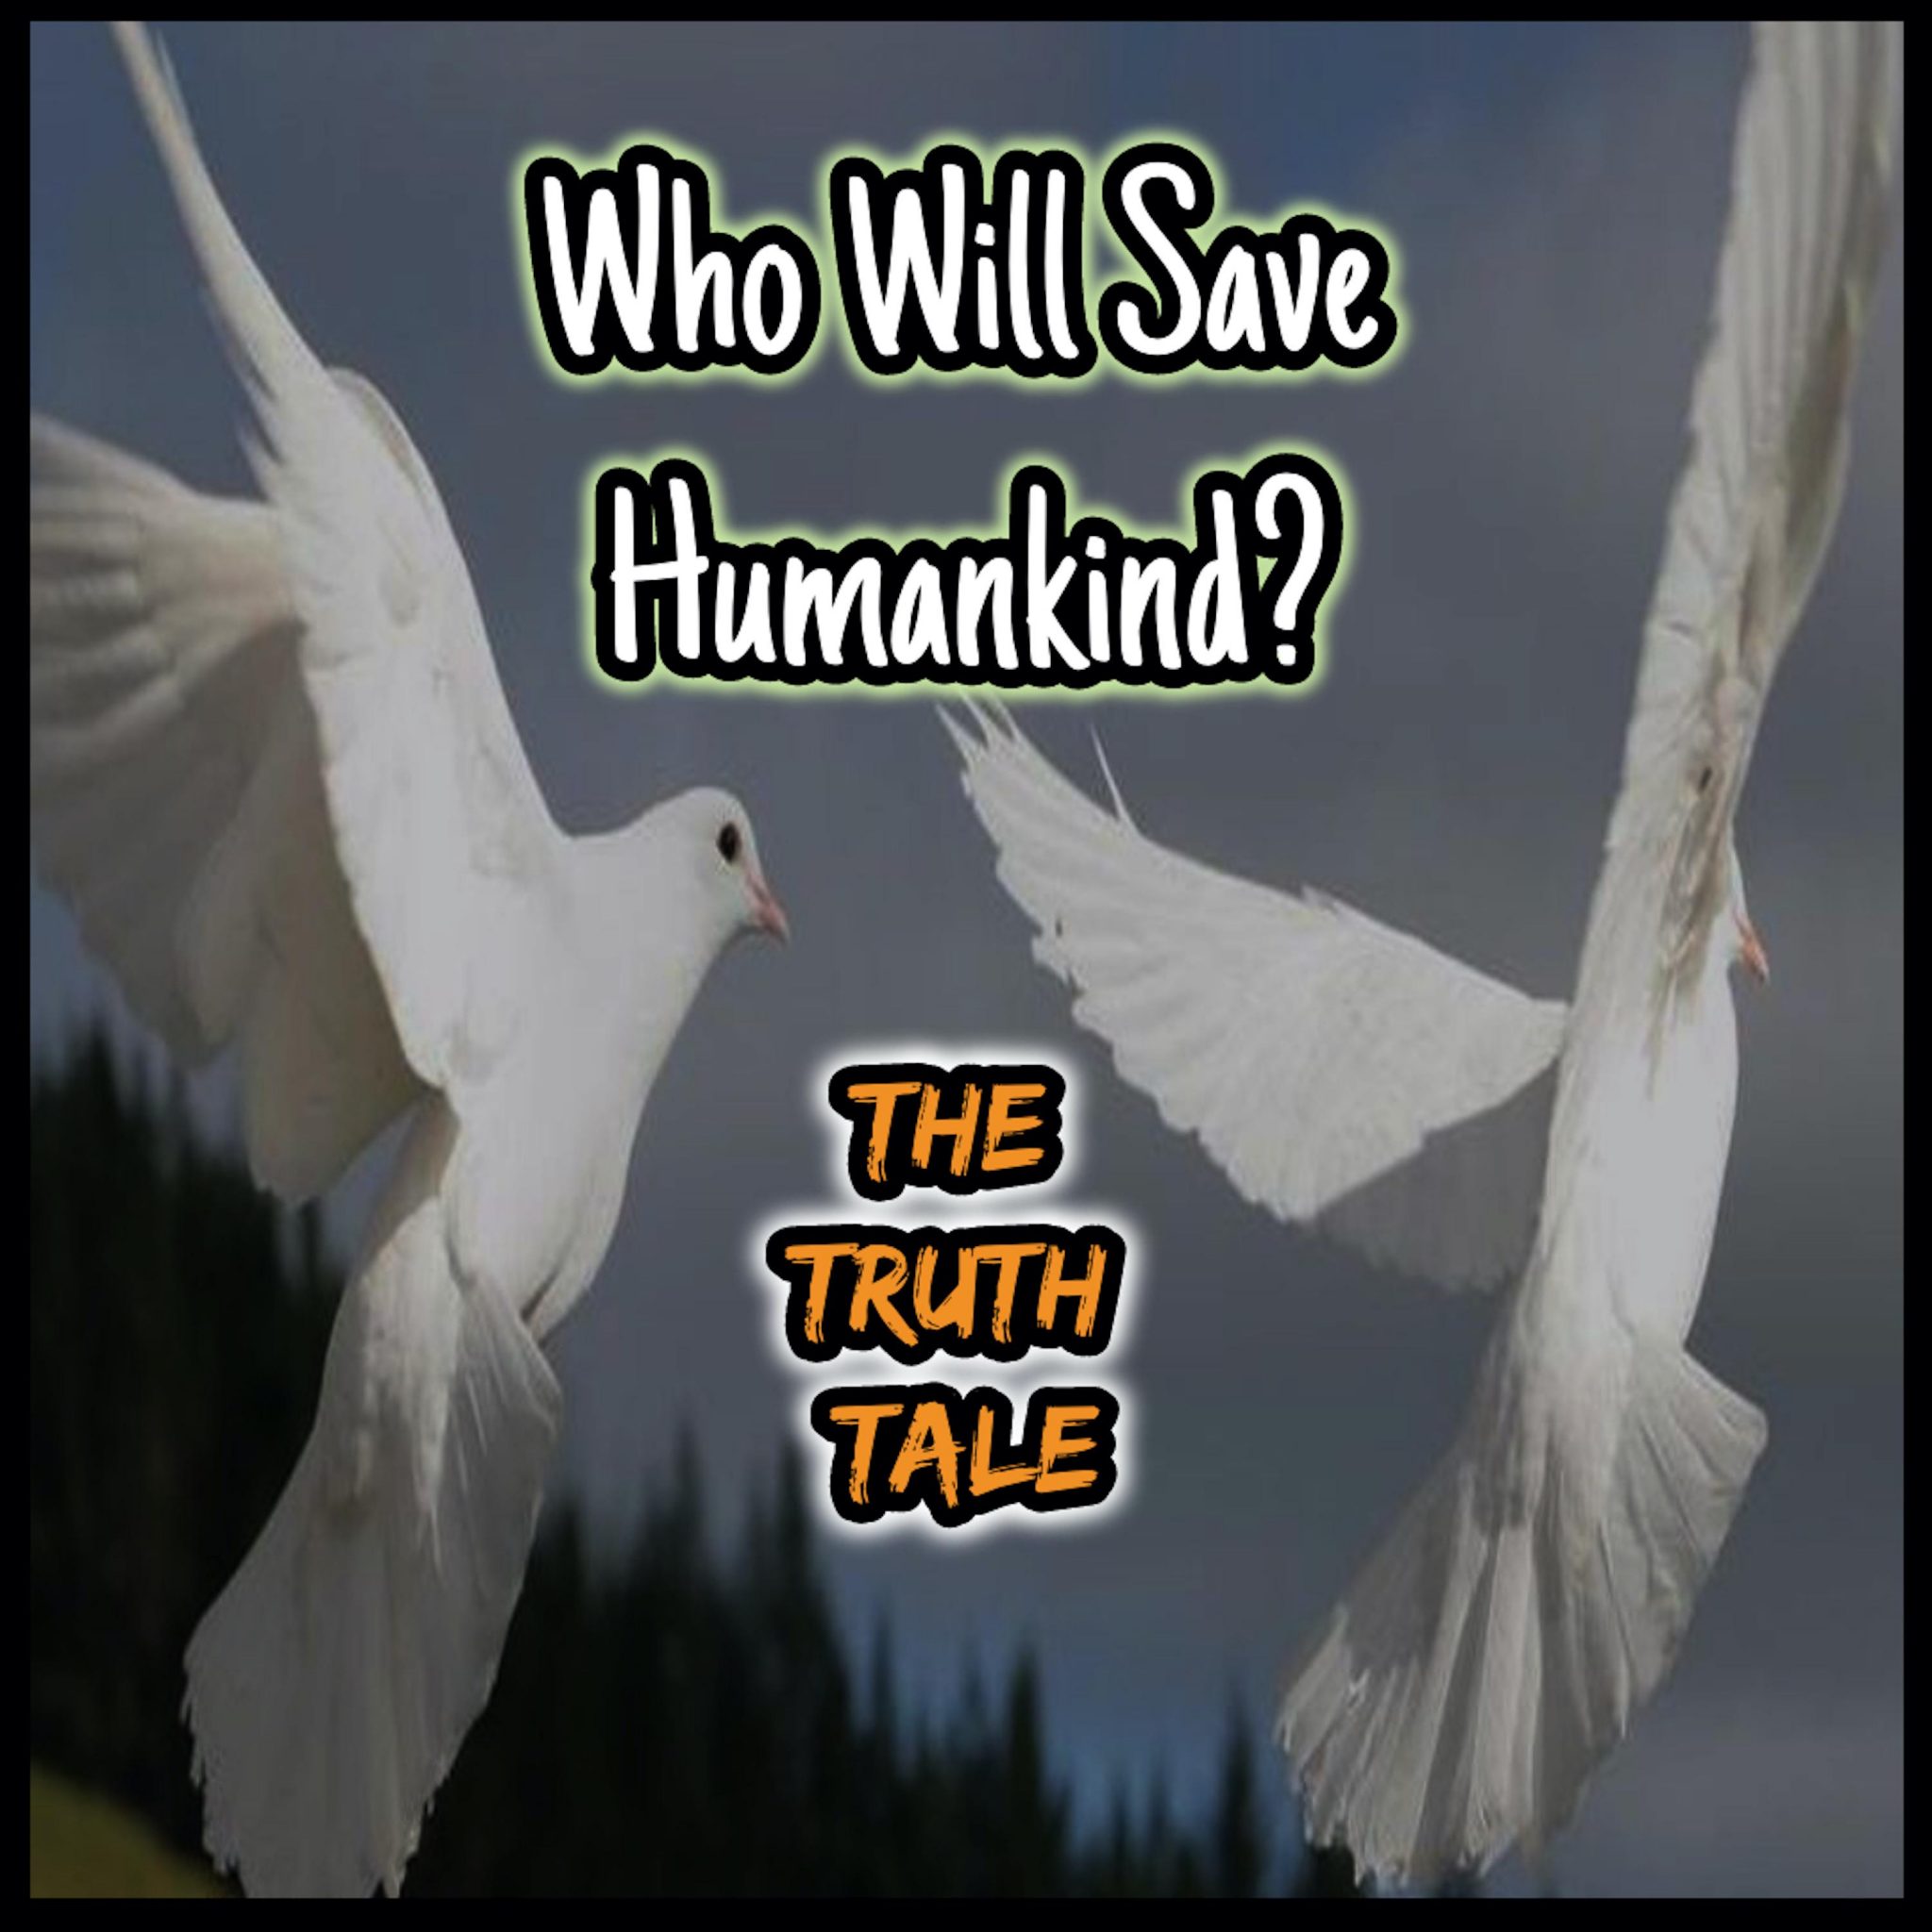 Press Release – New Album Release: Who Will Save Humankind? by The Truth Tale